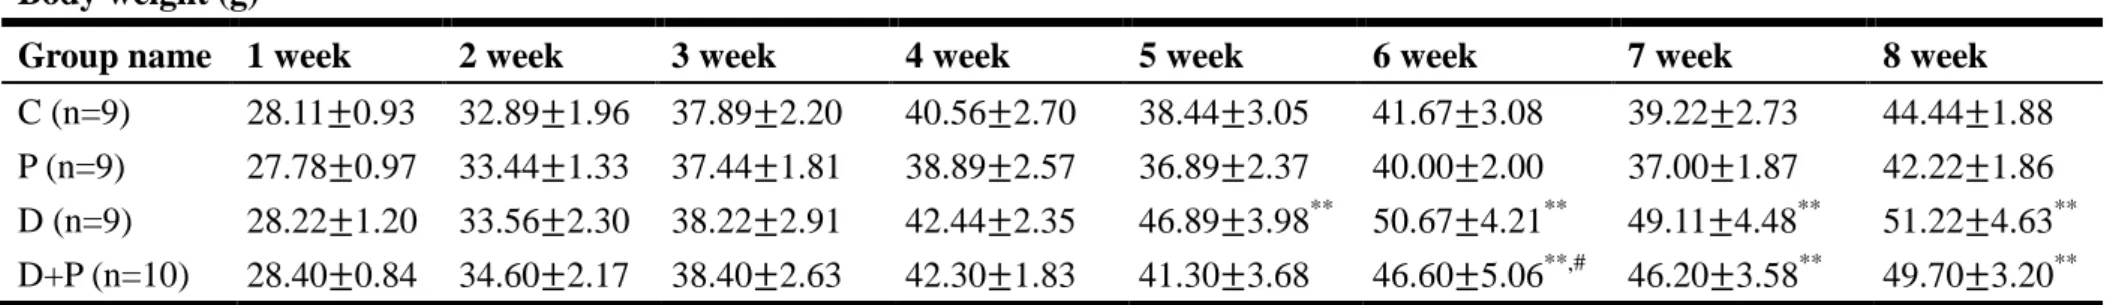 Table 1. Comparison of body weight between different groups of ICR mice during 8-week experiment